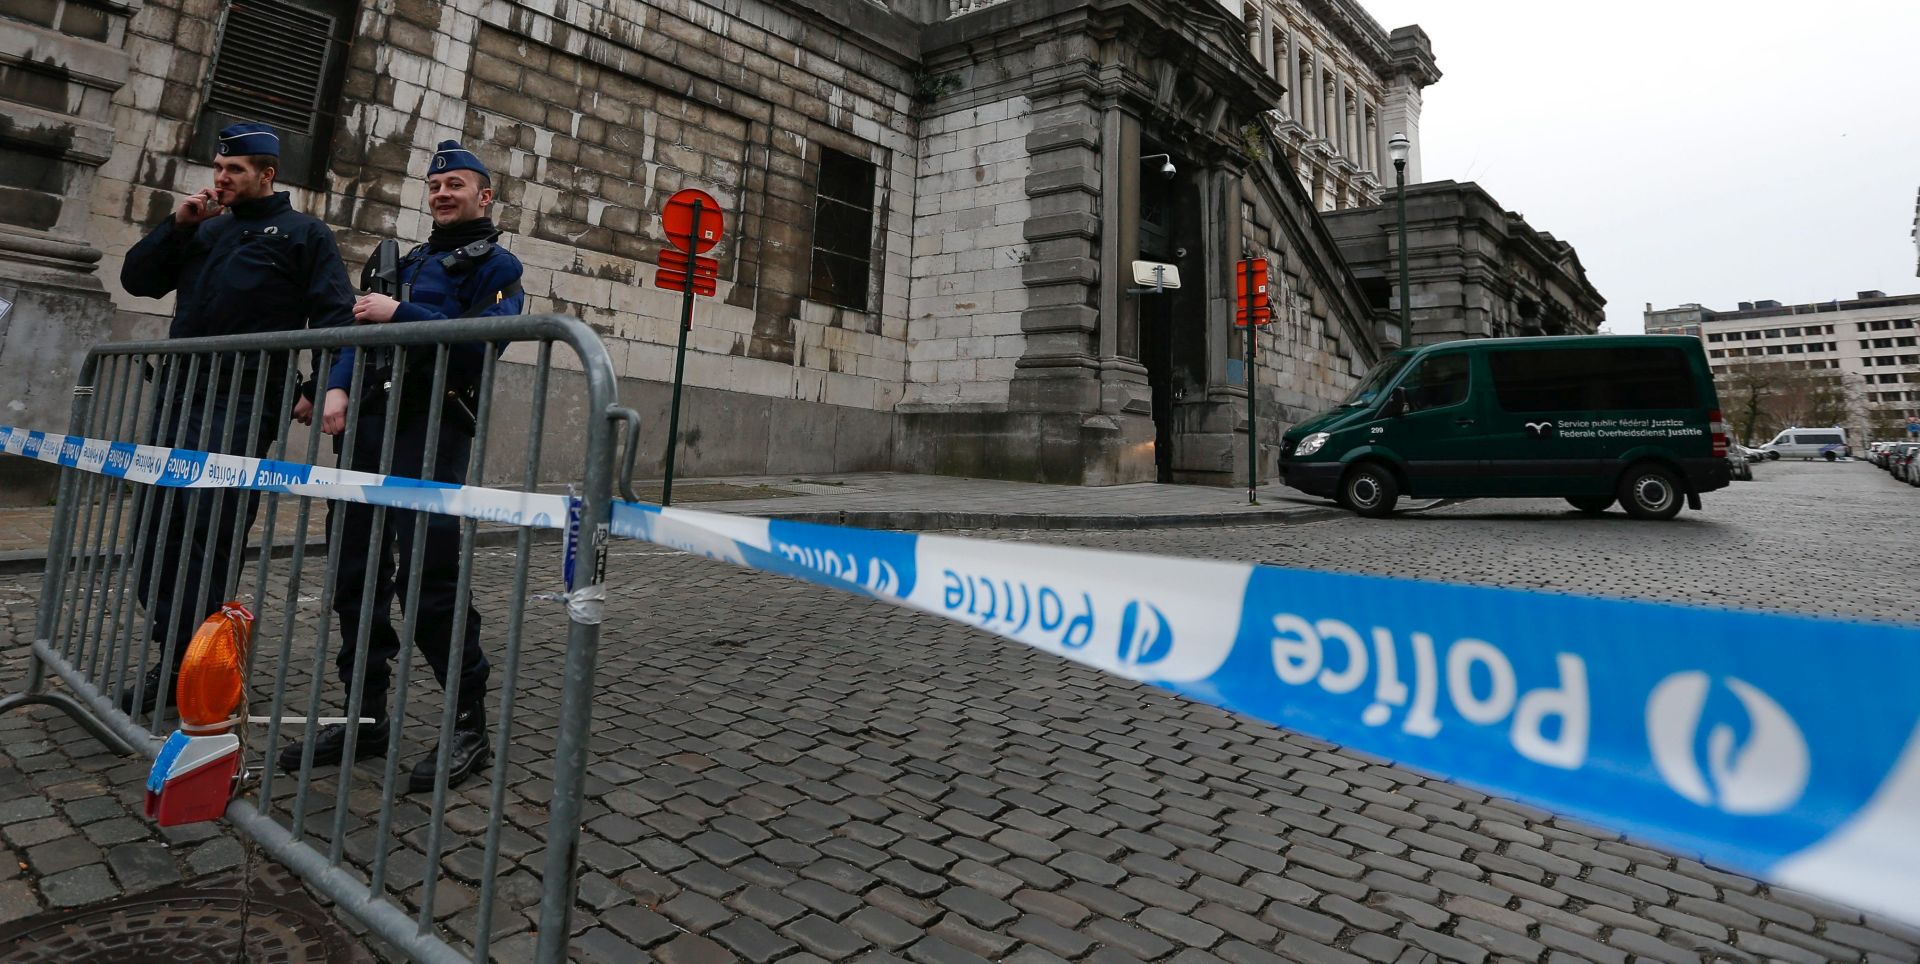 epa05235953 Police guards the entrance of the Brussels Council Chamber building as a police van believed to carry two terrorist suspects for a hearing, in Brussels, Belgium, 30 March 2016. The two men, identified only as Abderamane A. and Rabah N. by the federal prosecution have been arrested on 25 March during raids in Brussels connected to investigations into a foiled attack in France. The court will rule on their detention although France has not yet issued a European arrest warrant against them.  EPA/LAURENT DUBRULE